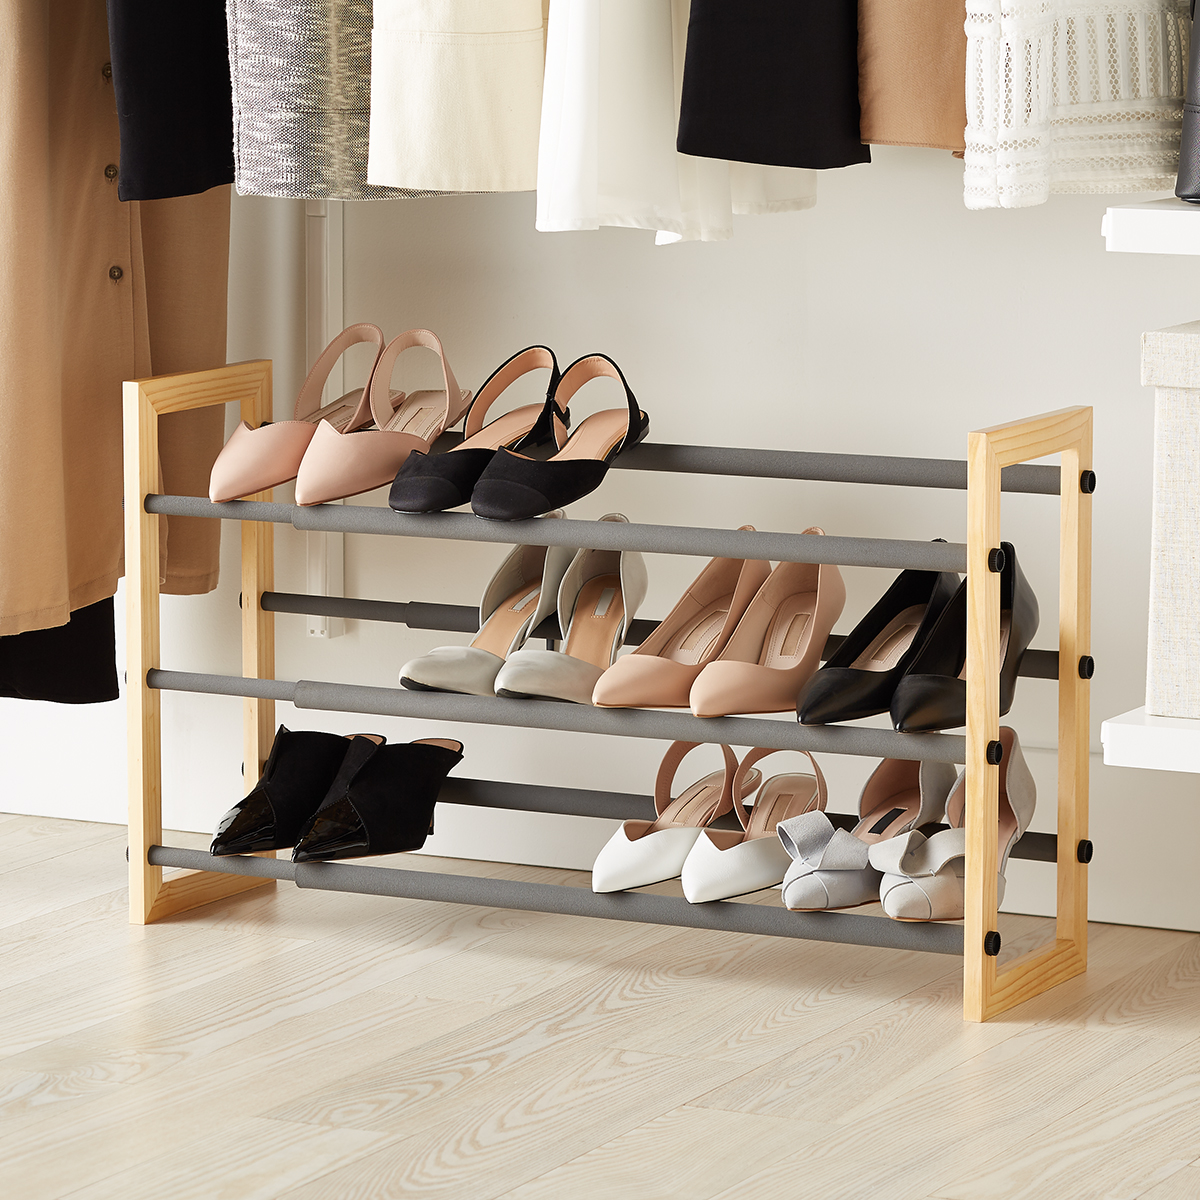 Wooden Shoe Racks The Container, Wooden Shoe Shelf For Closet